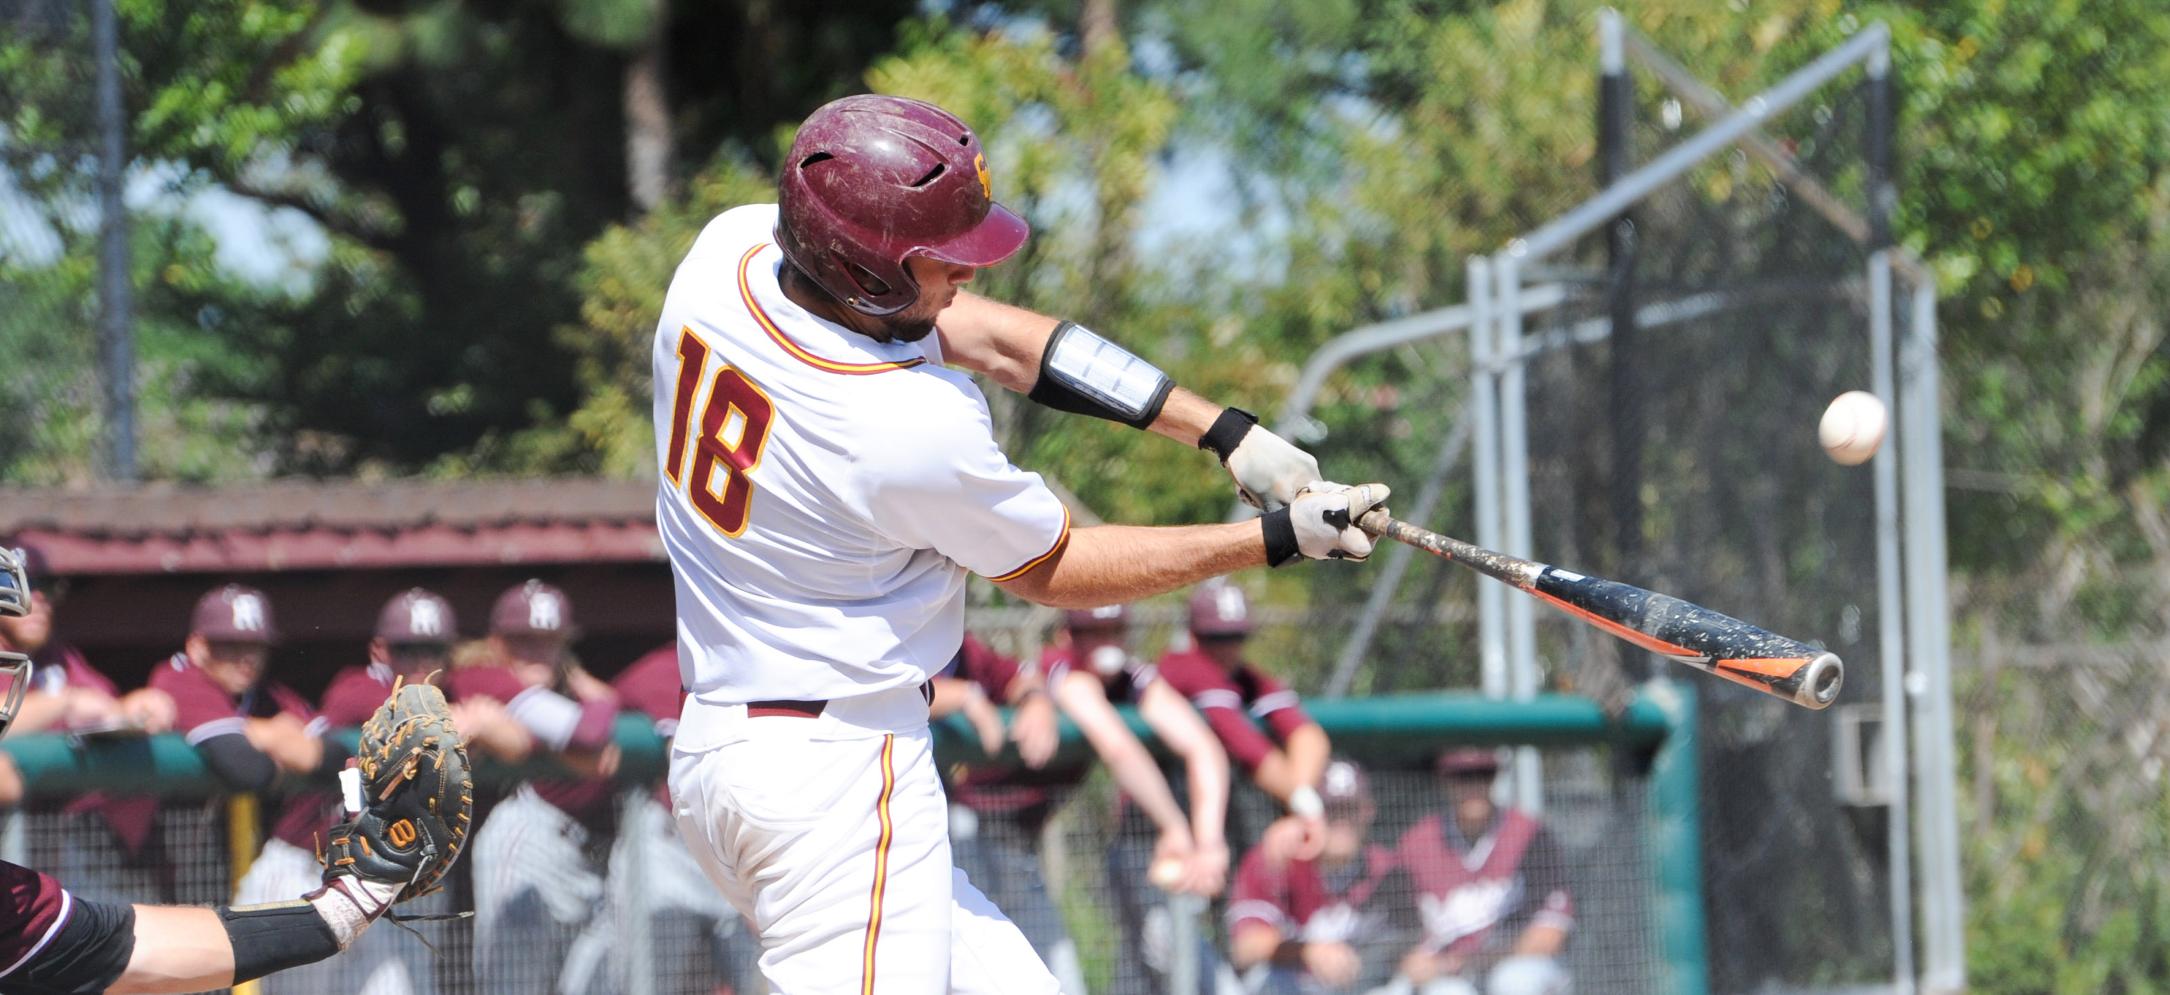 Smith named to All-SCIAC Second Team